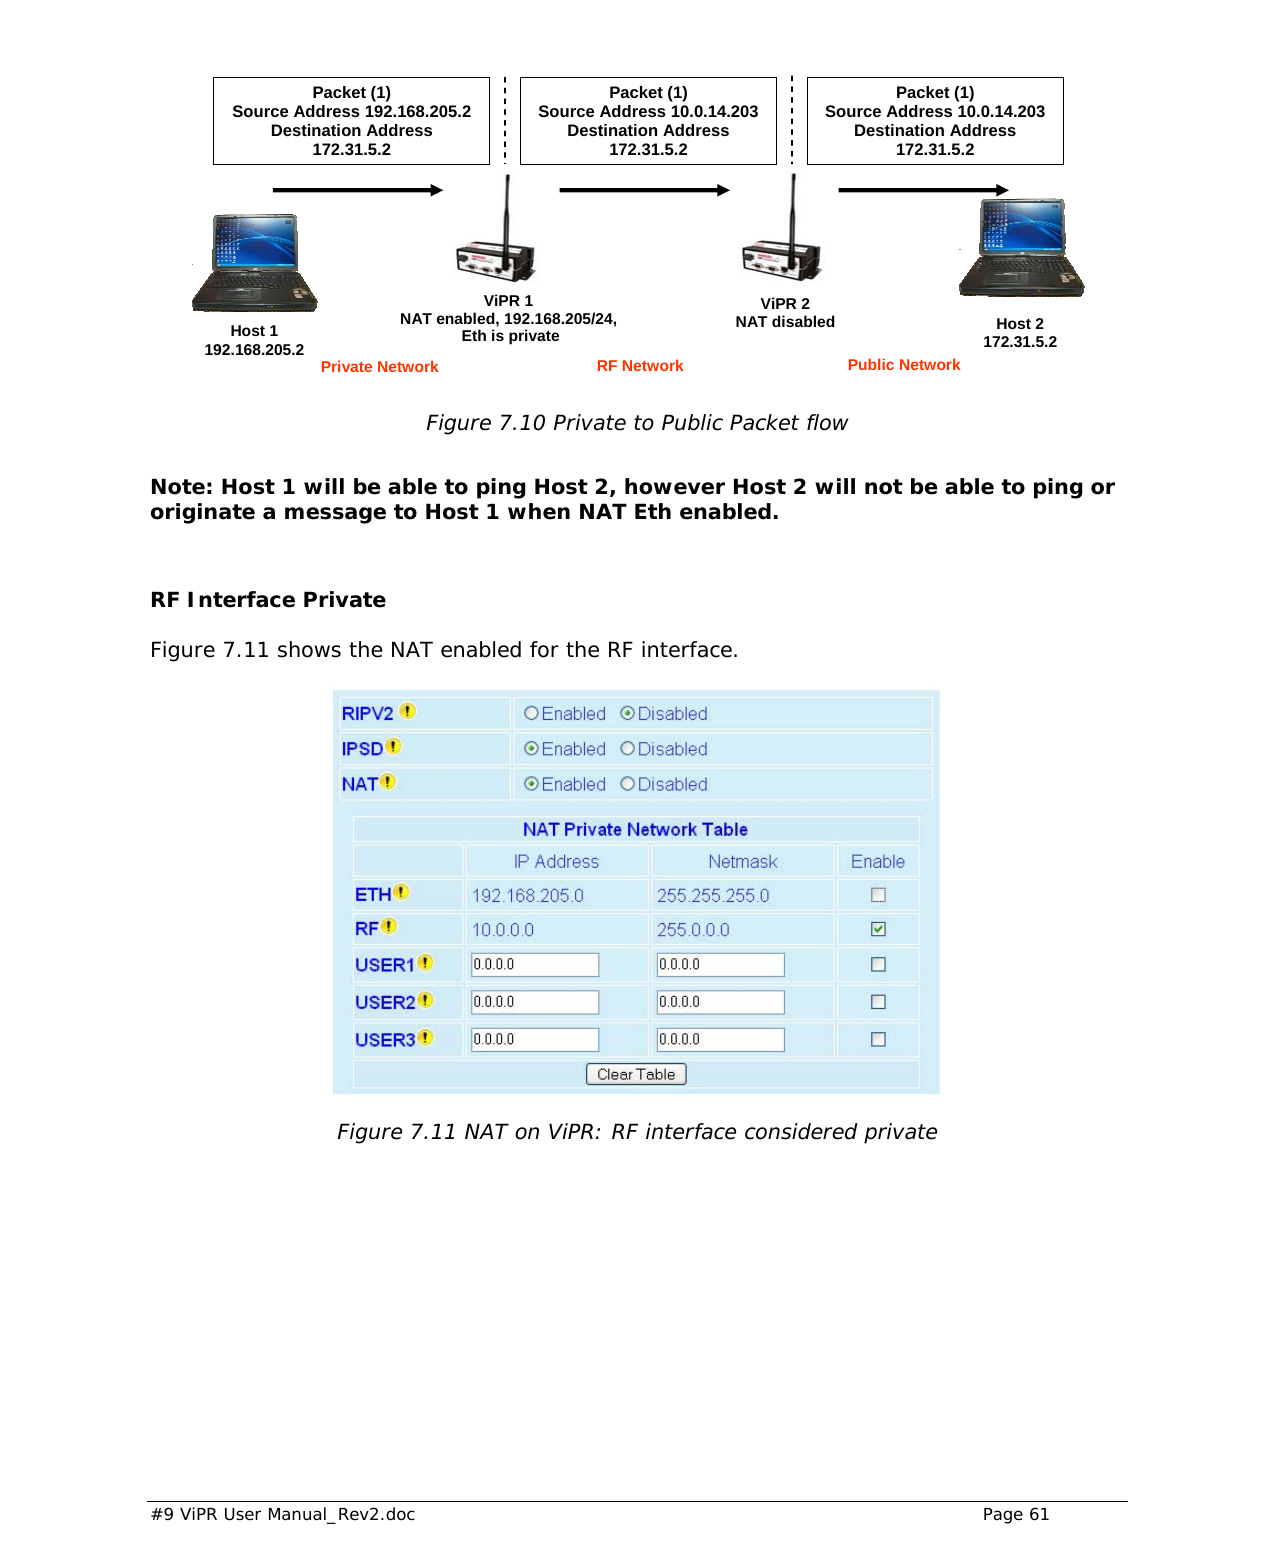  #9 ViPR User Manual_Rev2.doc    Page 61  Figure 7.10 Private to Public Packet flow  Note: Host 1 will be able to ping Host 2, however Host 2 will not be able to ping or originate a message to Host 1 when NAT Eth enabled.  RF Interface Private Figure 7.11 shows the NAT enabled for the RF interface.   Figure 7.11 NAT on ViPR: RF interface considered private Packet (1) Source Address 192.168.205.2 Destination Address  172.31.5.2 Packet (1) Source Address 10.0.14.203 Destination Address 172.31.5.2 Packet (1) Source Address 10.0.14.203 Destination Address 172.31.5.2 Host 1  192.168.205.2 Host 2 172.31.5.2 ViPR 1NAT enabled, 192.168.205/24,   Eth is private ViPR 2 NAT disabled Private Network  RF Network  Public Network 